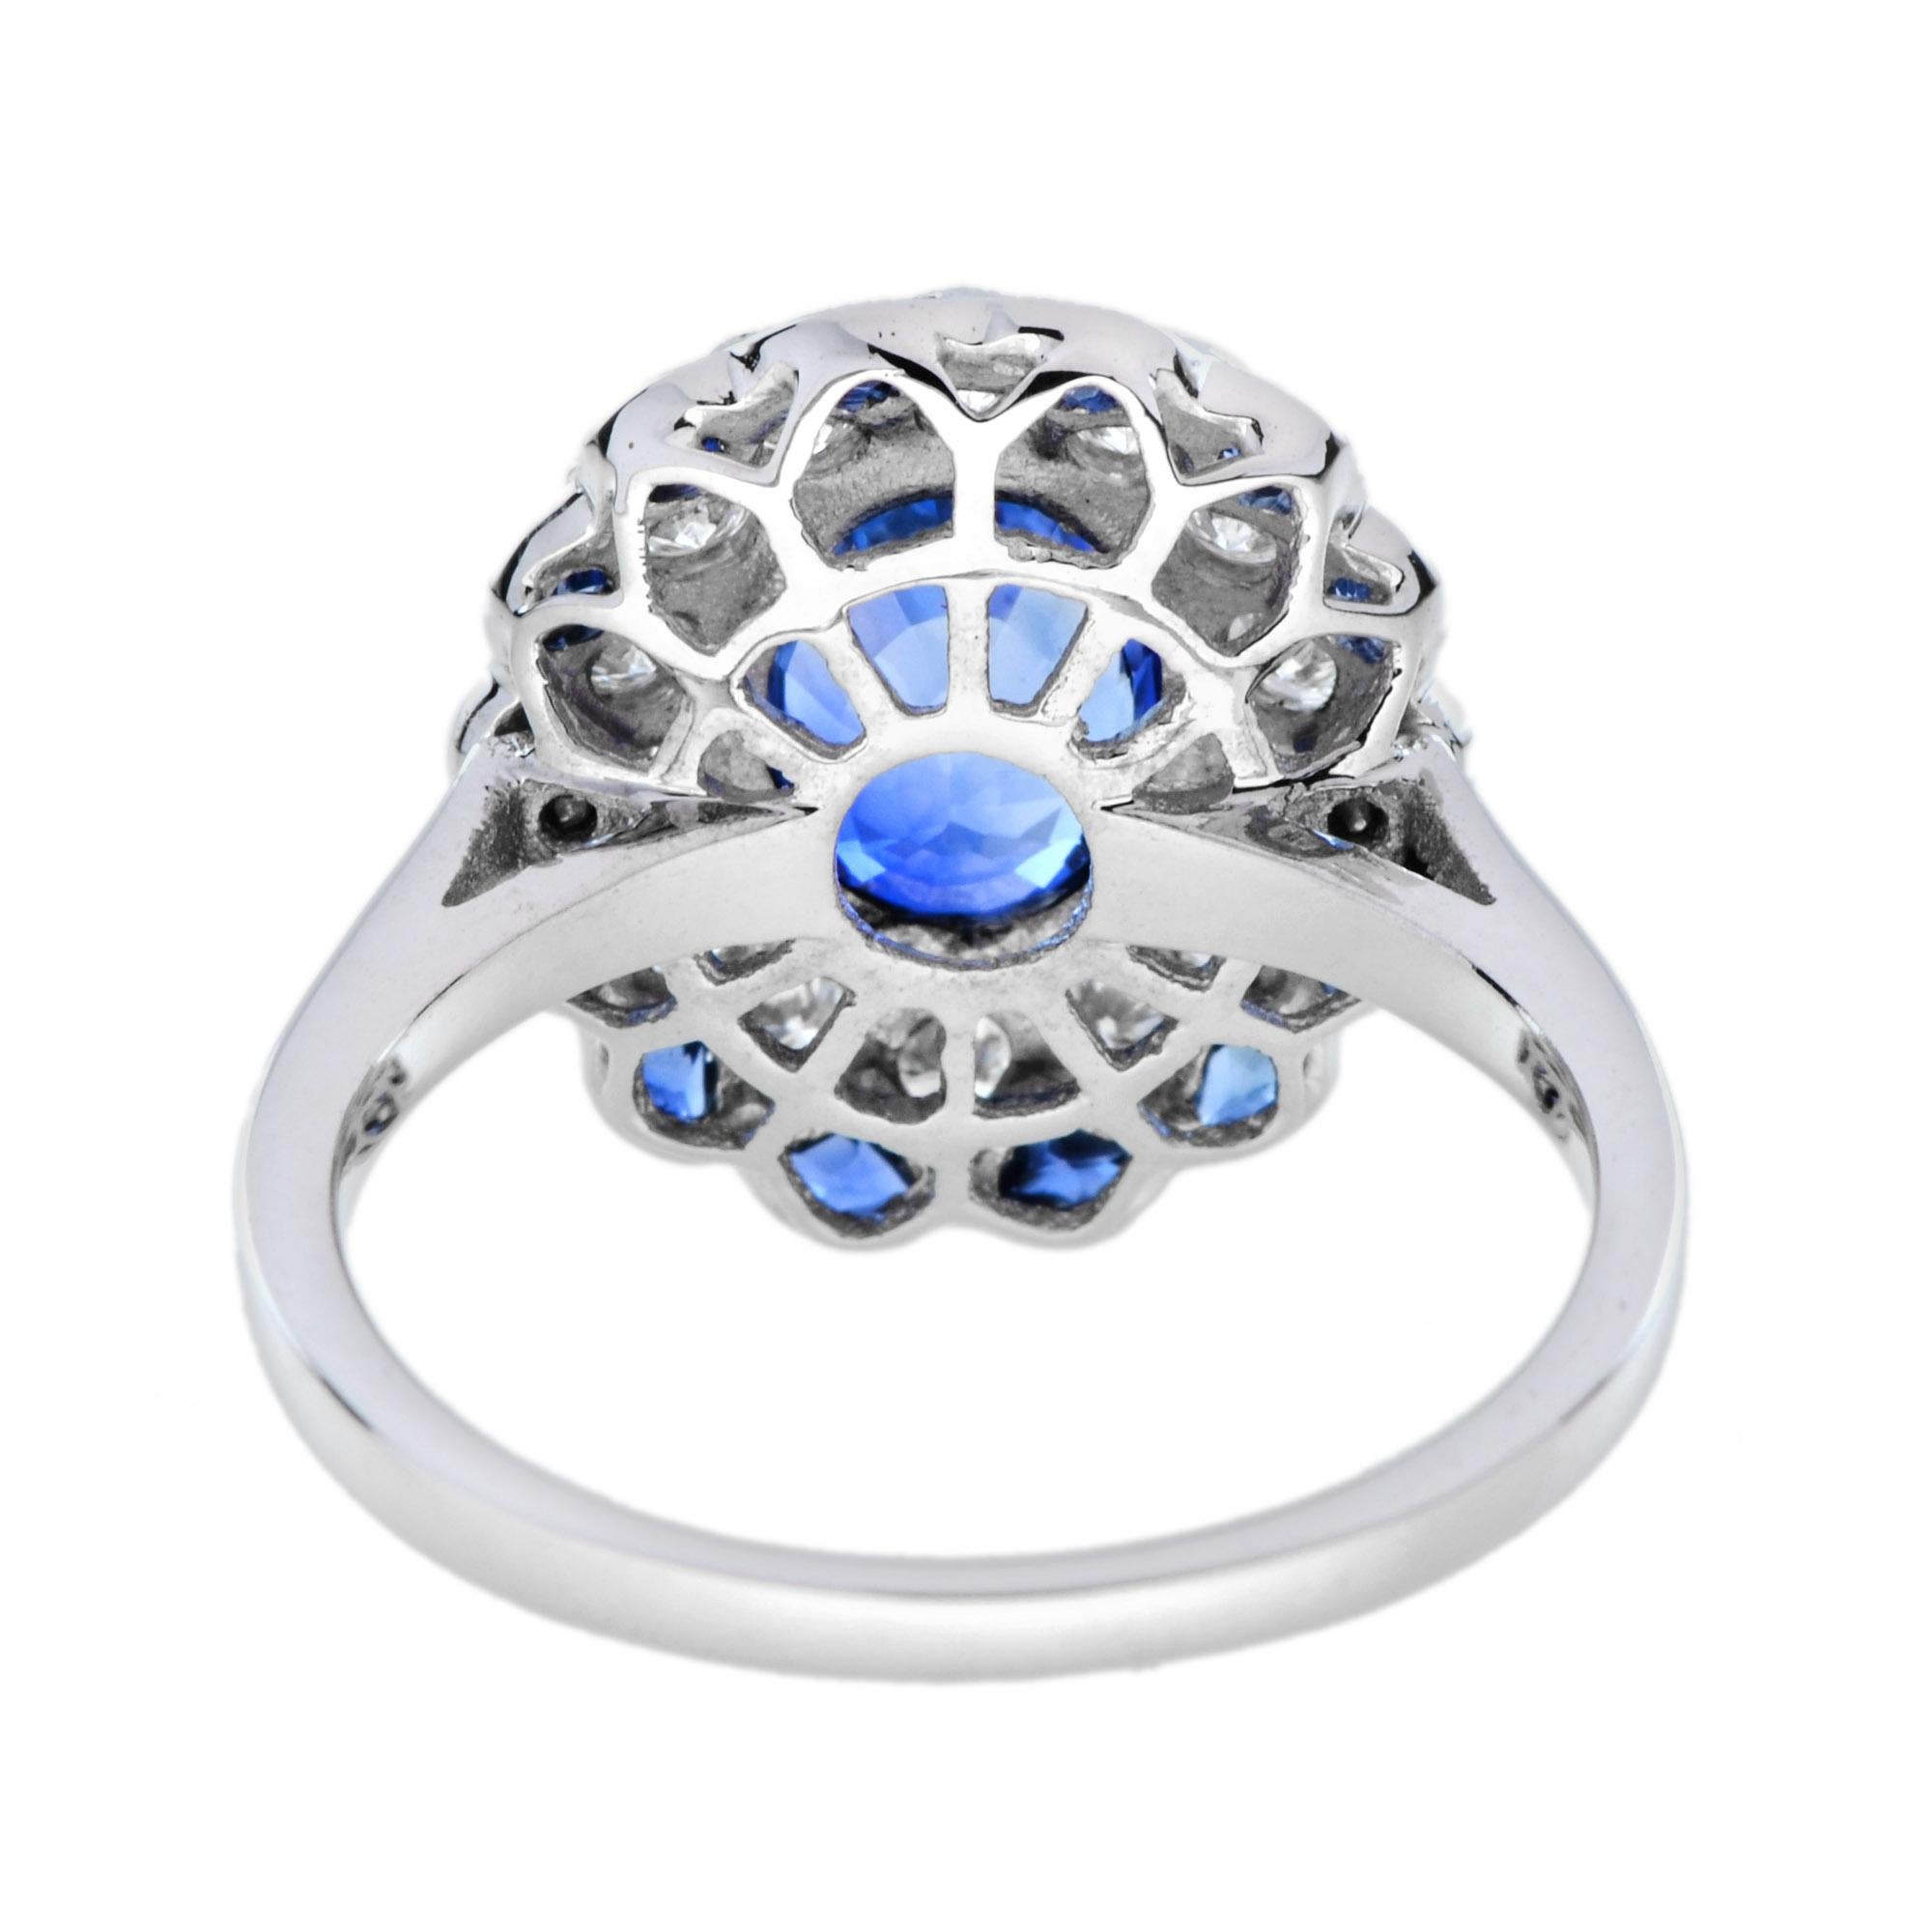 Oval Cut Ceylon Sapphire and Diamond Art Deco Style Halo Ring in 18K White Gold For Sale 1